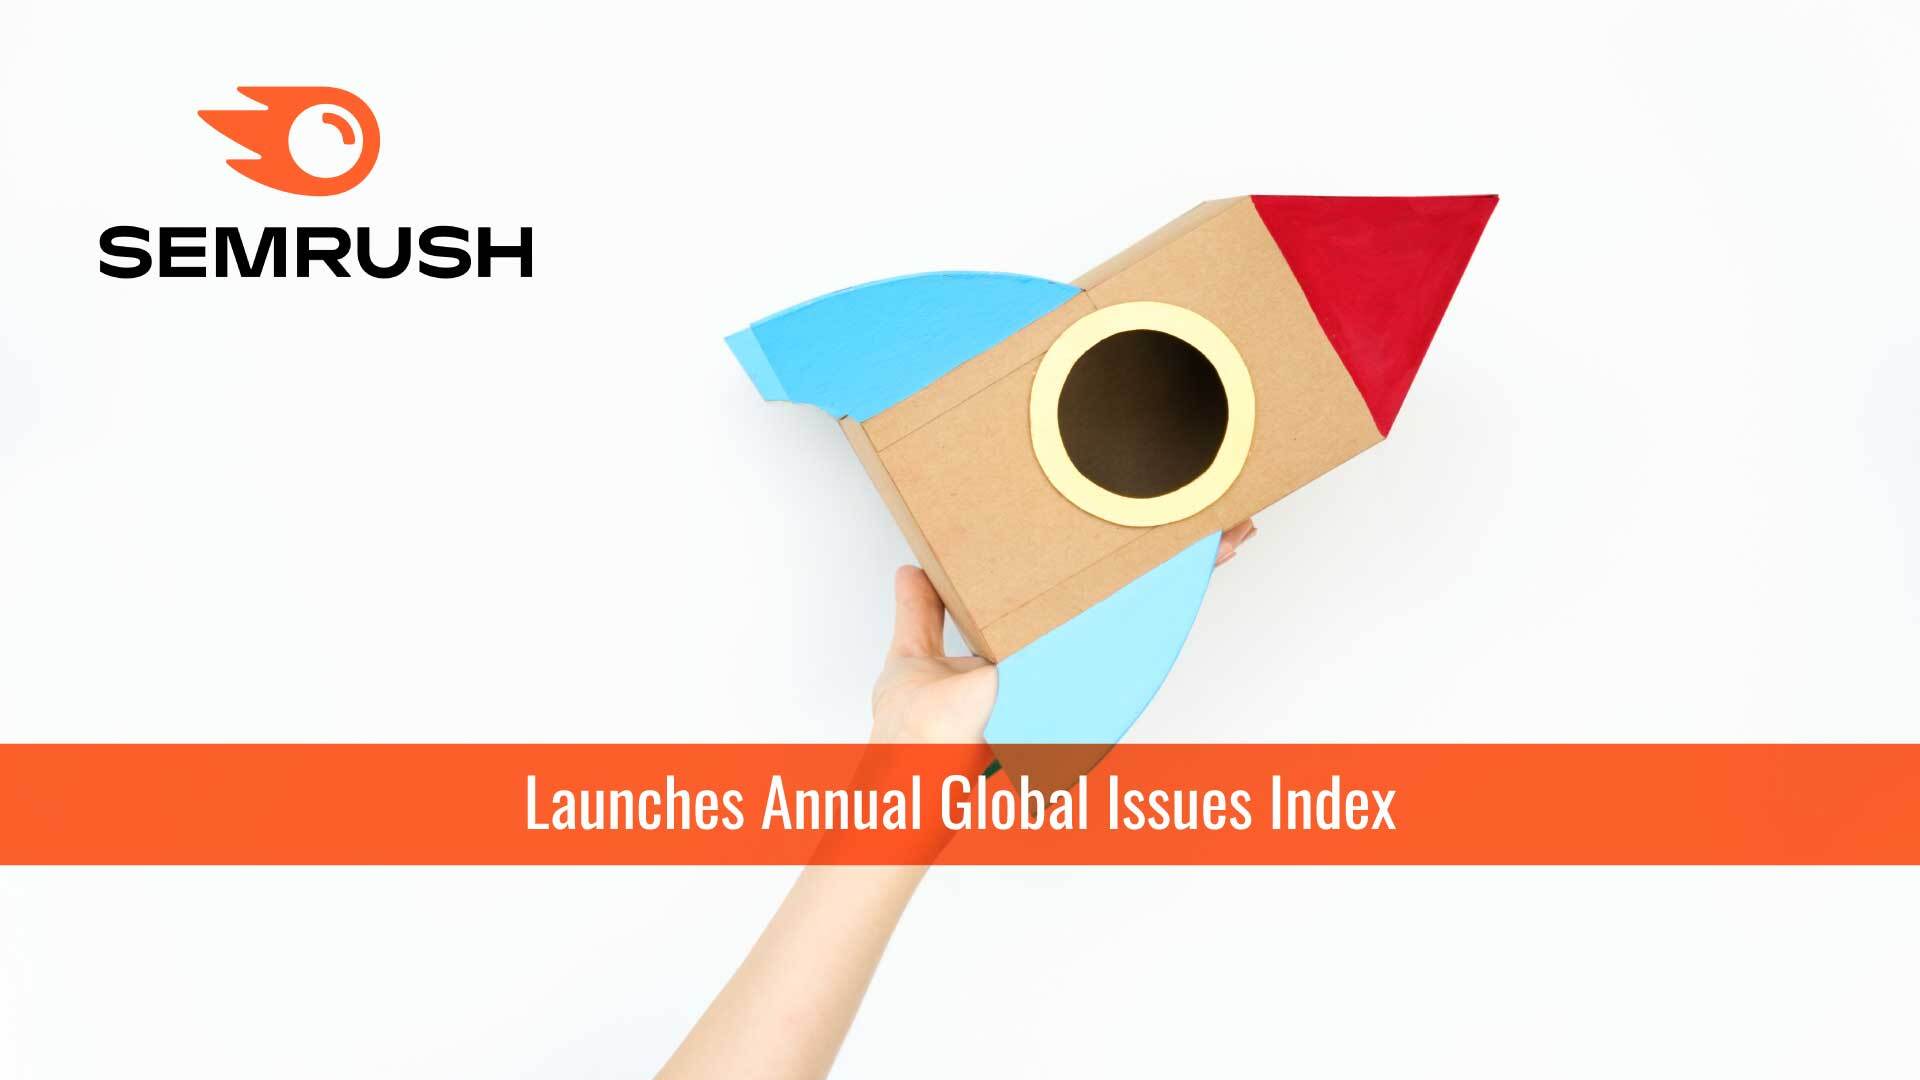 Semrush Launches Annual Global Issues Index, Inspiring Organizations To Drive Corporate Social Responsibility (CSR) Efforts